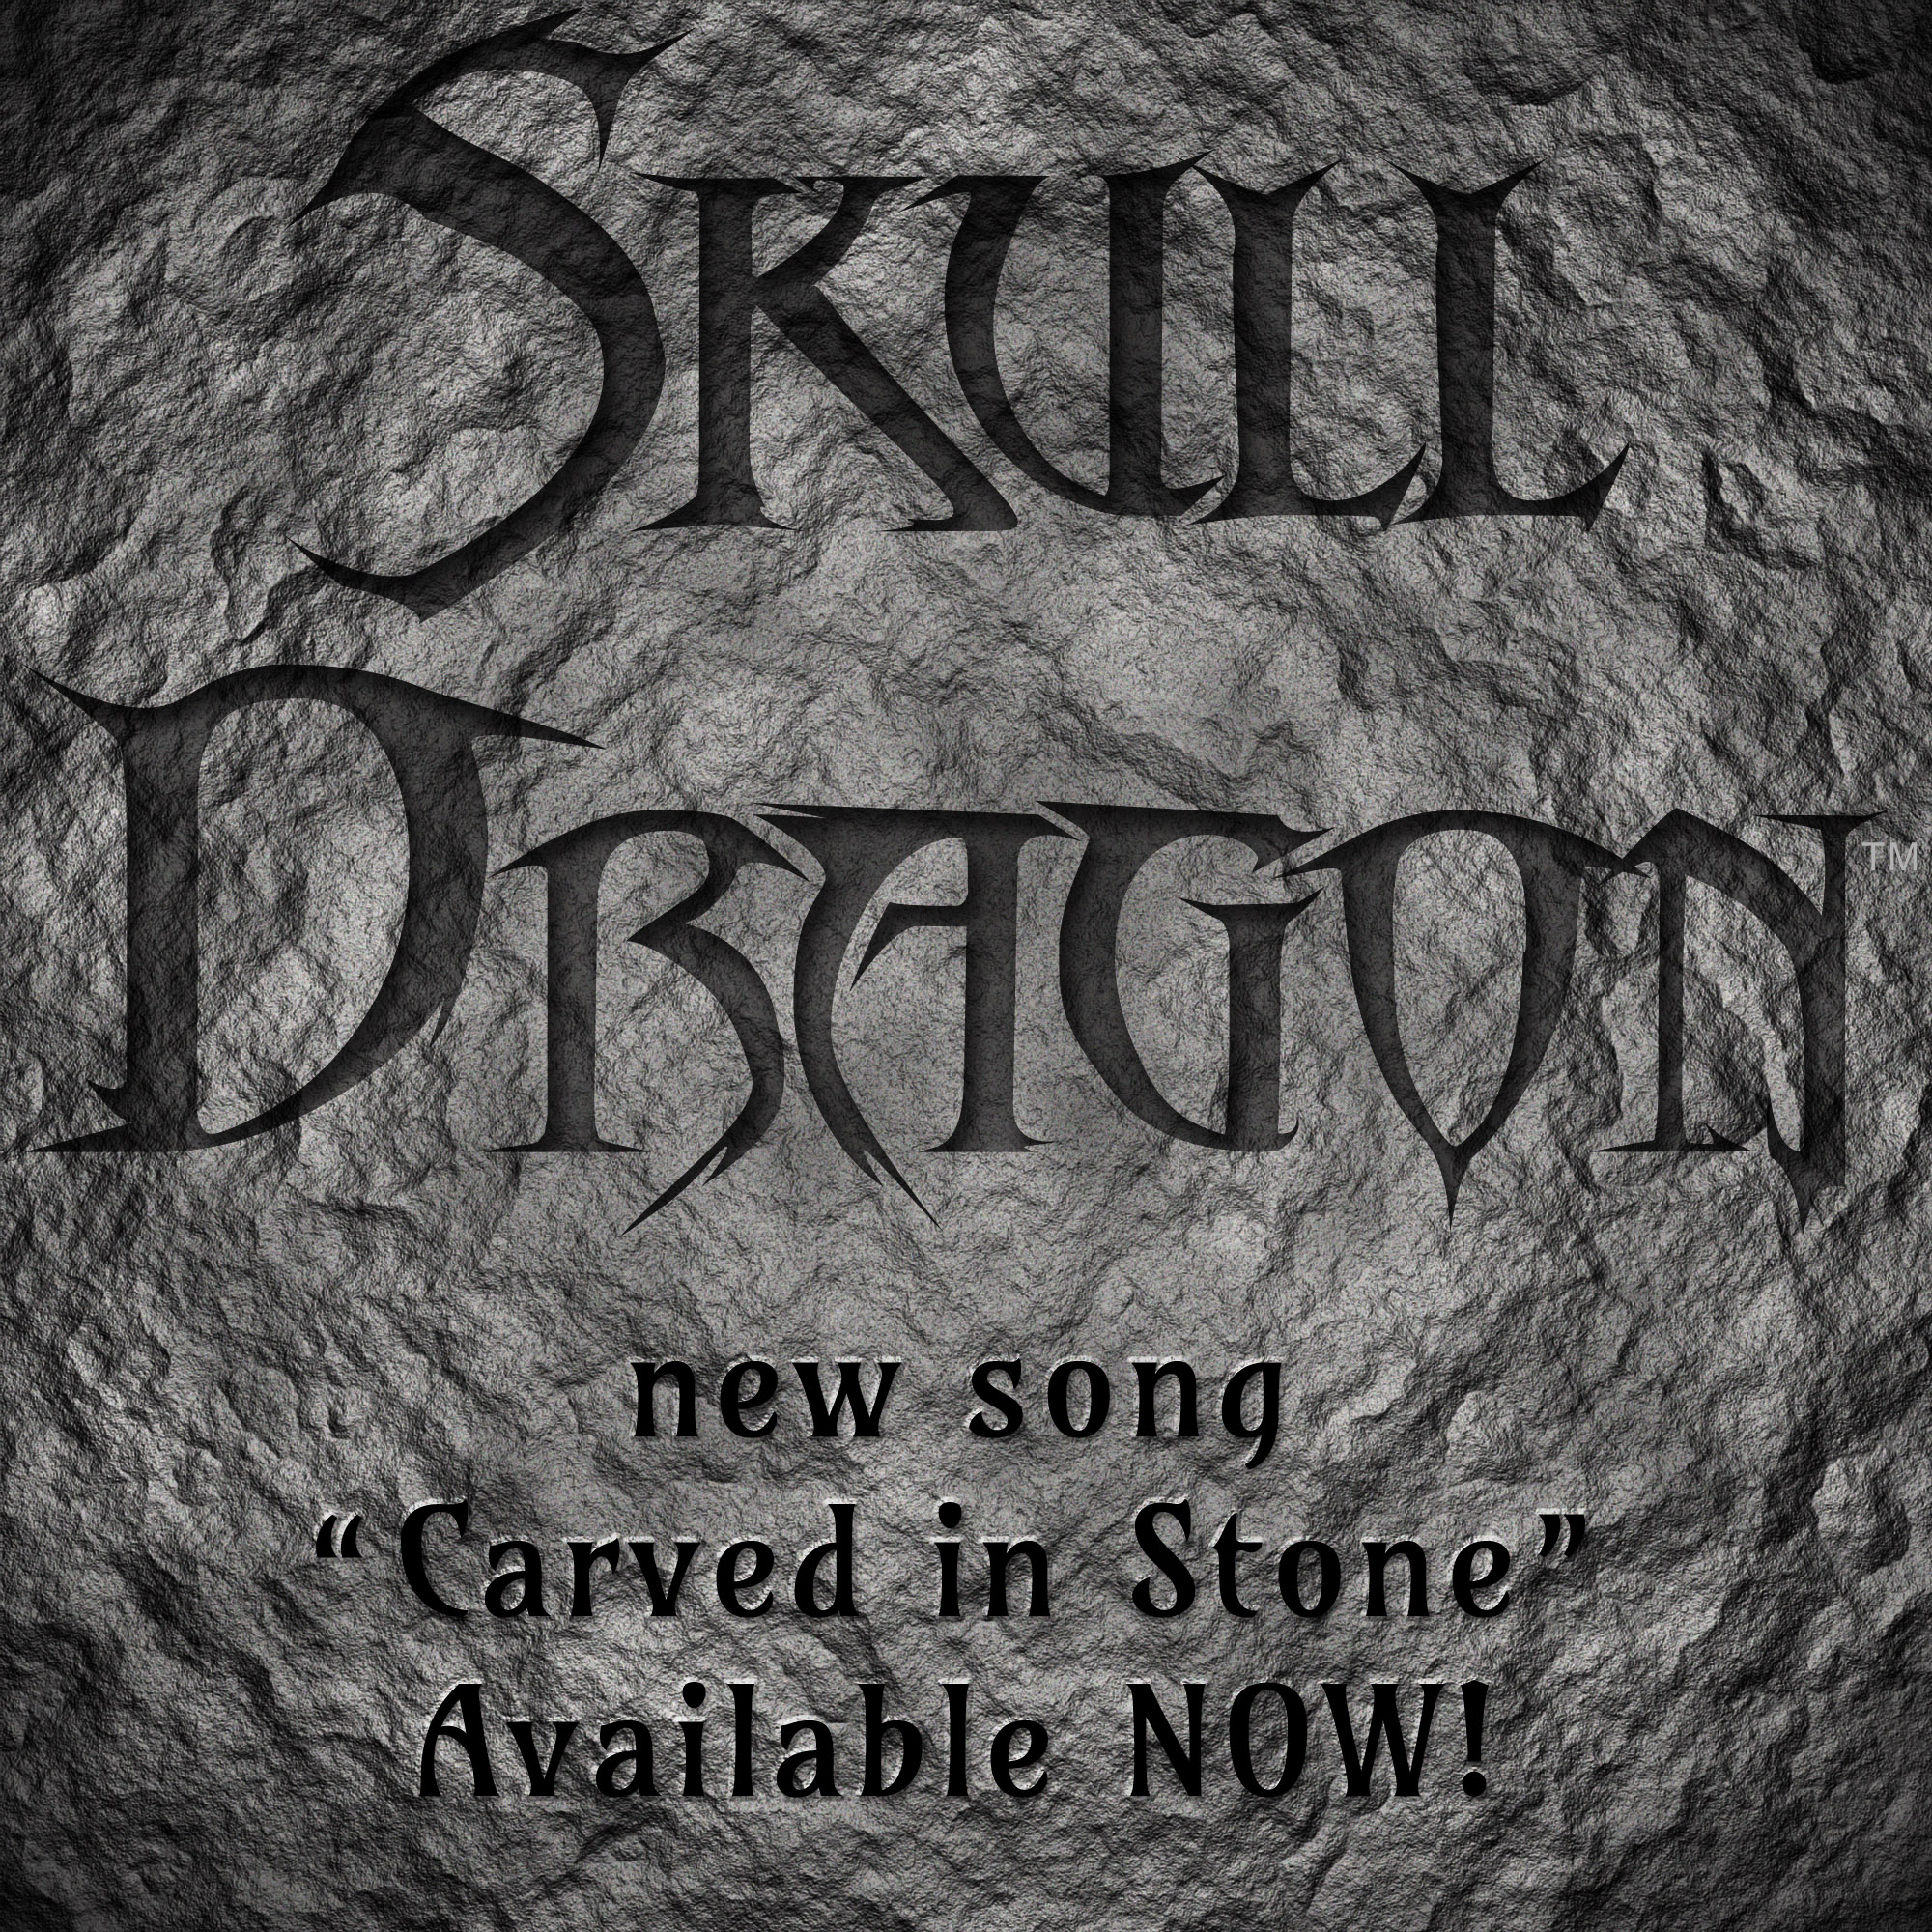 Skull Dragon band - Carved In Stone - Halloween Release